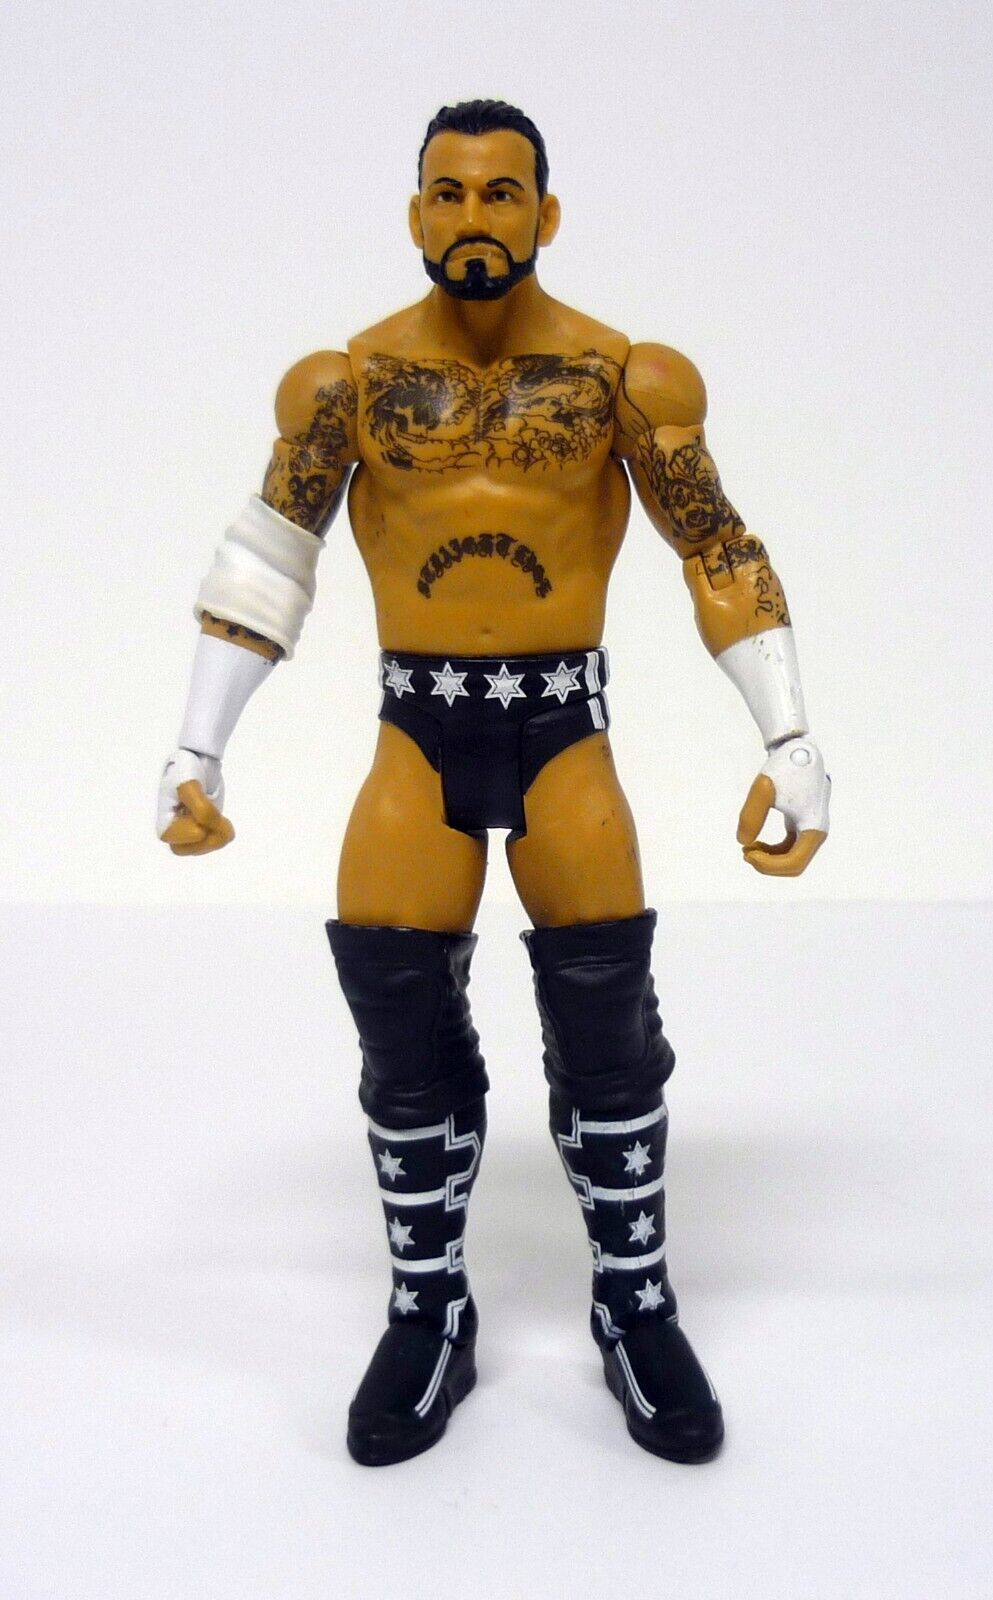 Primary image for WWE Signature Series CM Punk Wrestling 7" Action Figure 2012